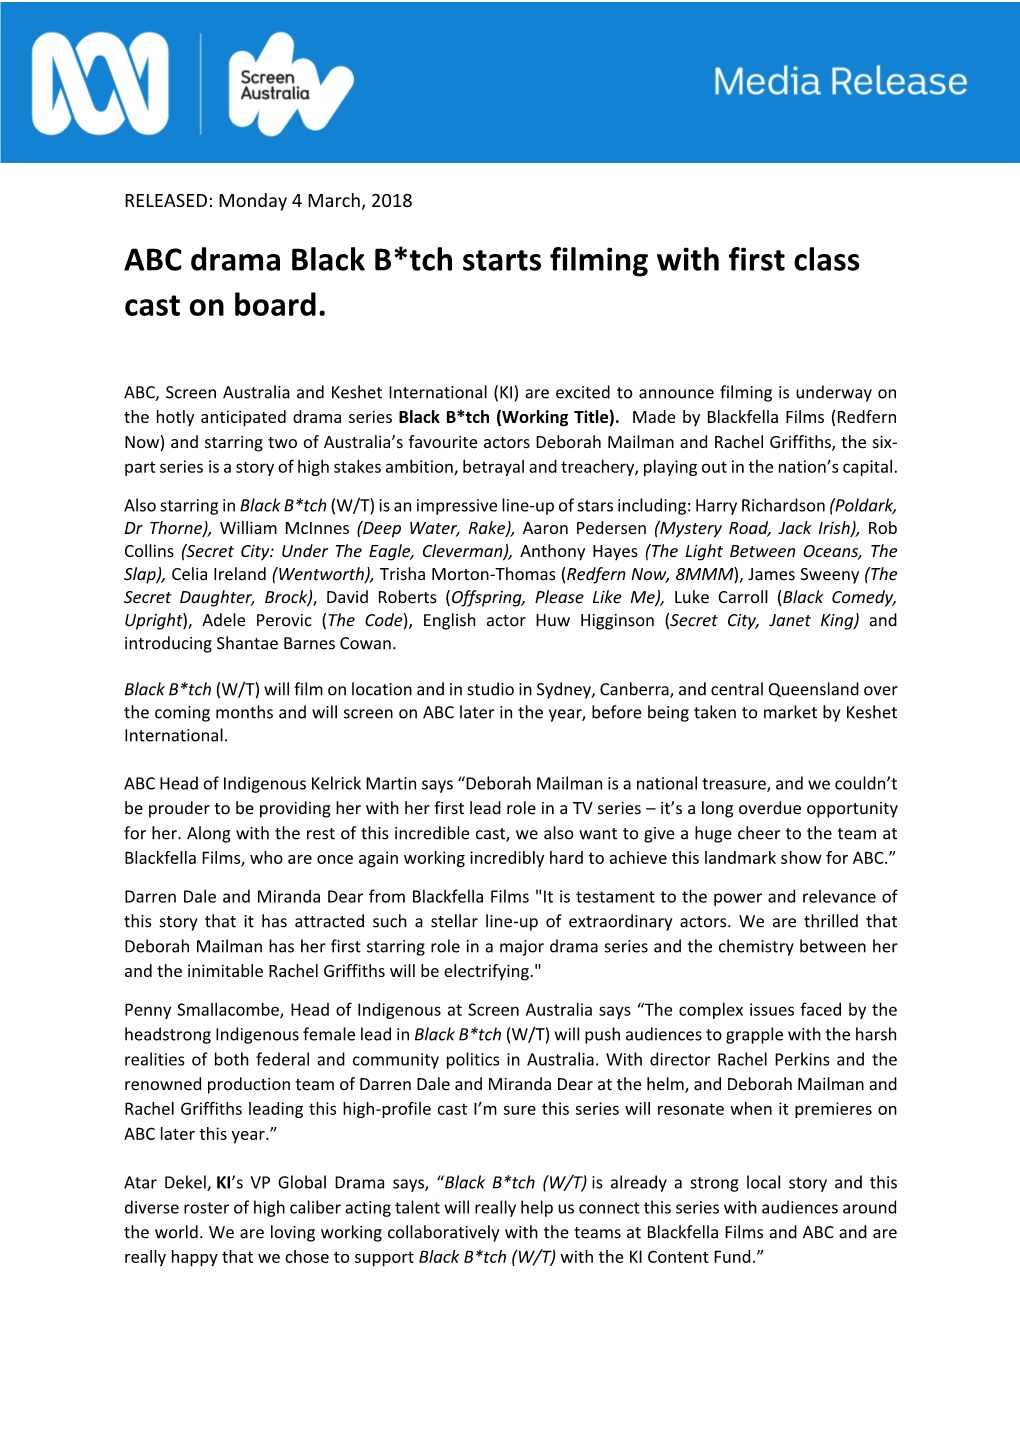 ABC Drama Black B*Tch Starts Filming with First Class Cast on Board